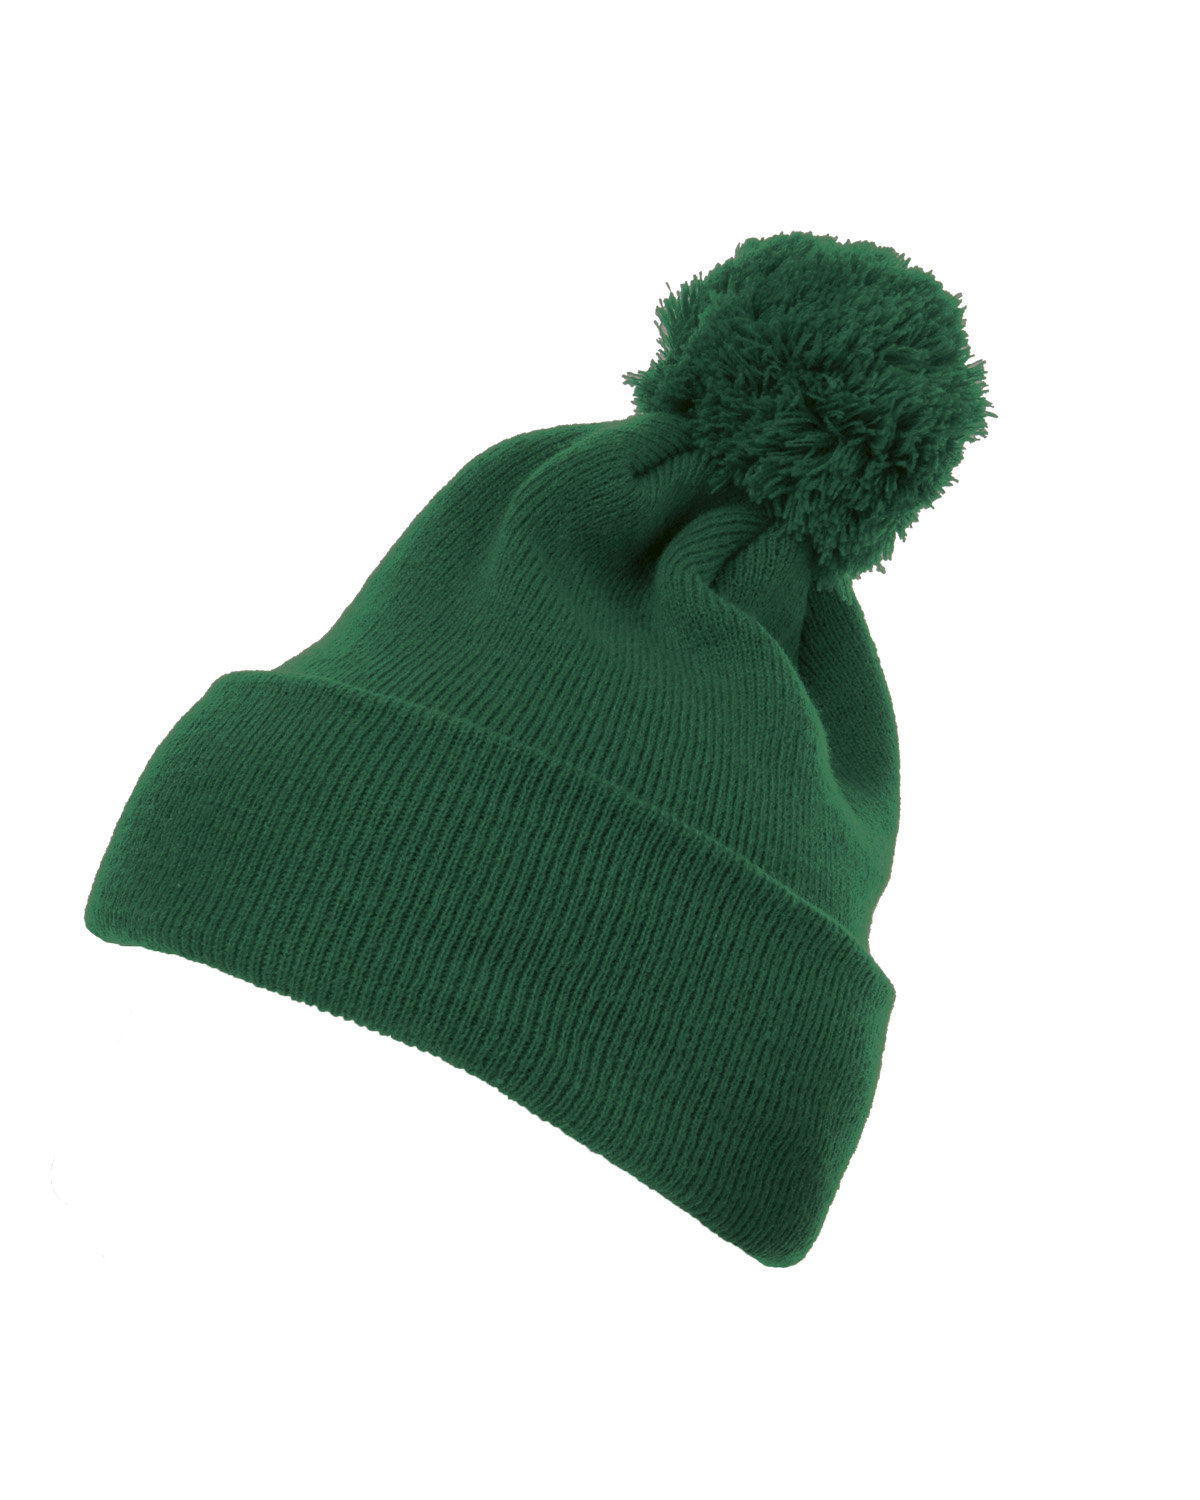 Yupoong Cuffed Knit Beanie alphabroder | with Pom Hat Pom